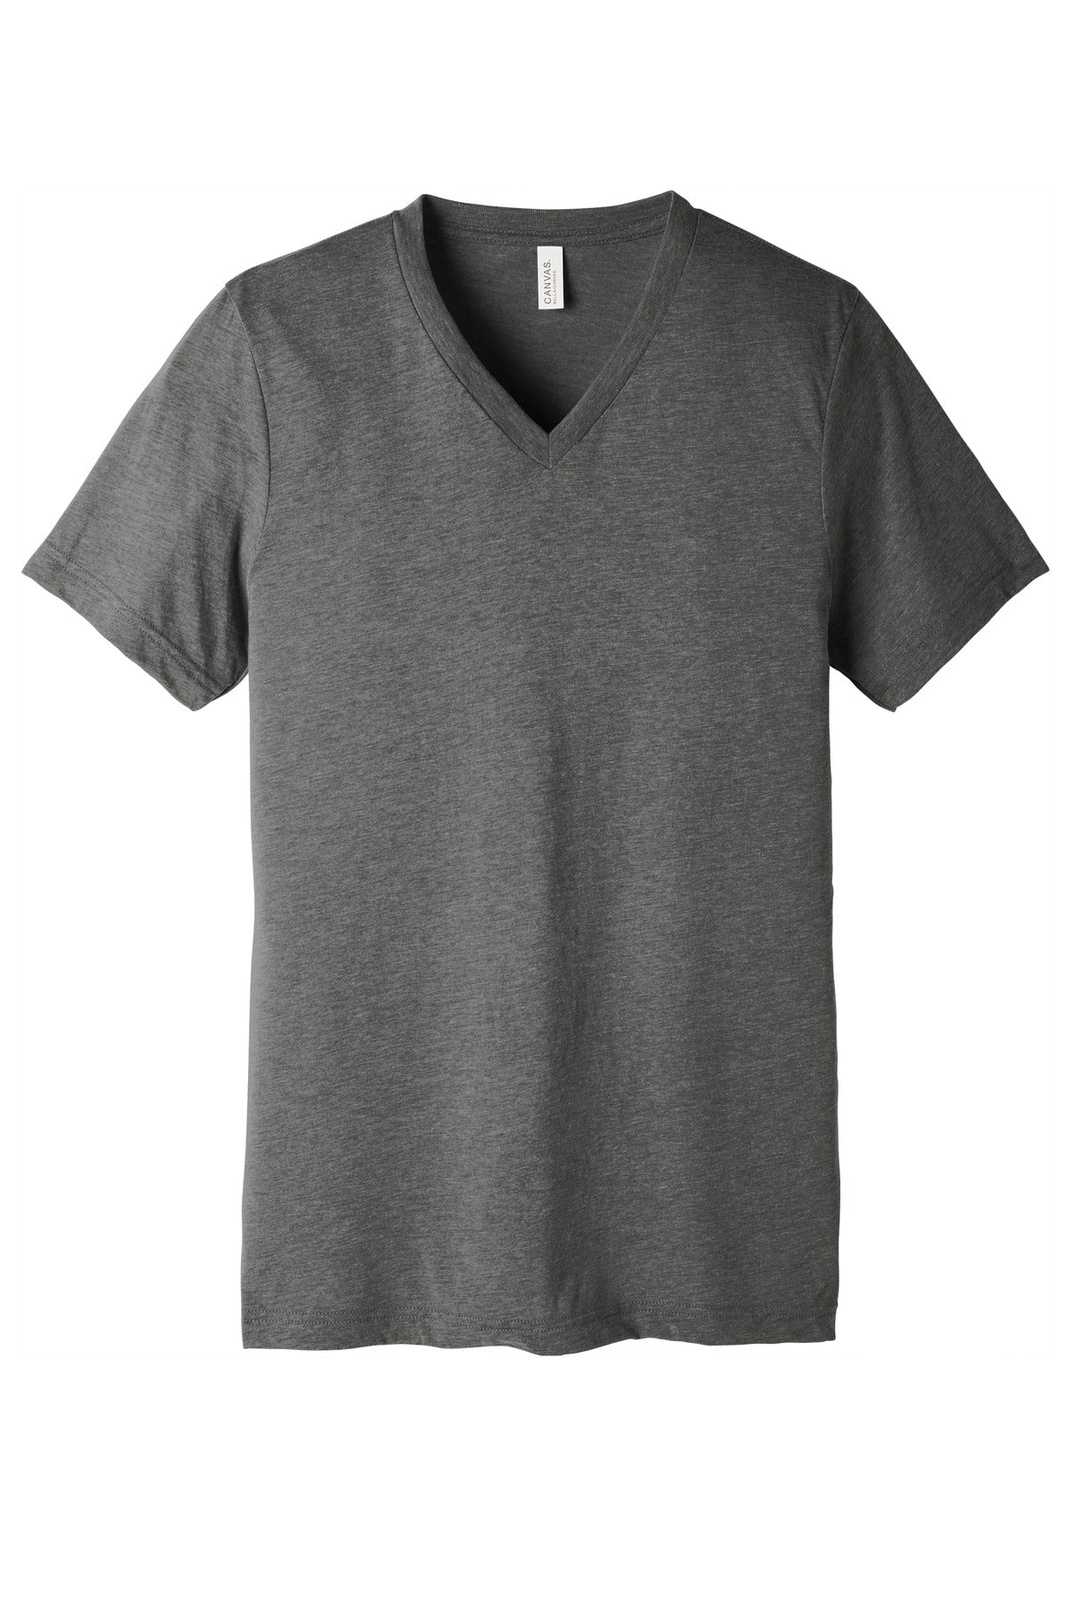 Bella + Canvas 3415 Unisex Triblend Short Sleeve V-Neck Tee - Gray Triblend - HIT a Double